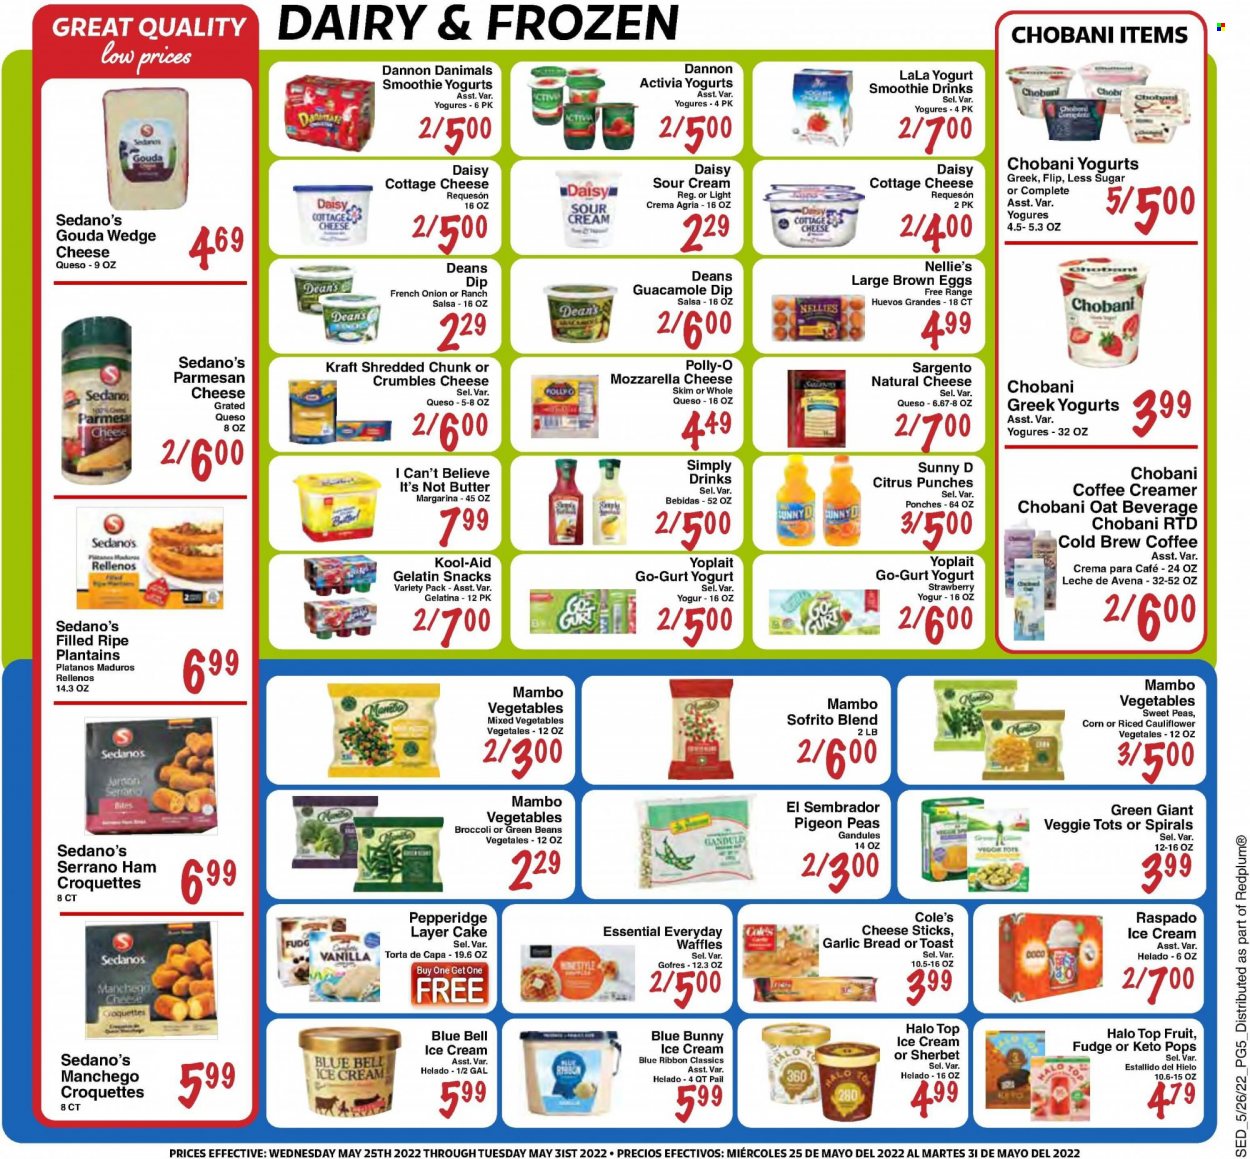 thumbnail - Sedano's Flyer - 05/25/2022 - 05/31/2022 - Sales products - bread, Blue Ribbon, waffles, broccoli, corn, green beans, onion, Kraft®, ham, guacamole, cottage cheese, gouda, Manchego, mozzarella, parmesan, cheese, cheese crumbles, Sargento, Activia, Yoplait, Chobani, Dannon, Danimals, eggs, butter, I Can't Believe It's Not Butter, sour cream, creamer, dip, ice cream, sherbet, Blue Bell, Blue Bunny, mixed vegetables, cheese sticks, potato croquettes, fudge, snack, oats, toor dal, salsa, smoothie, gelatin, plantains. Page 5.